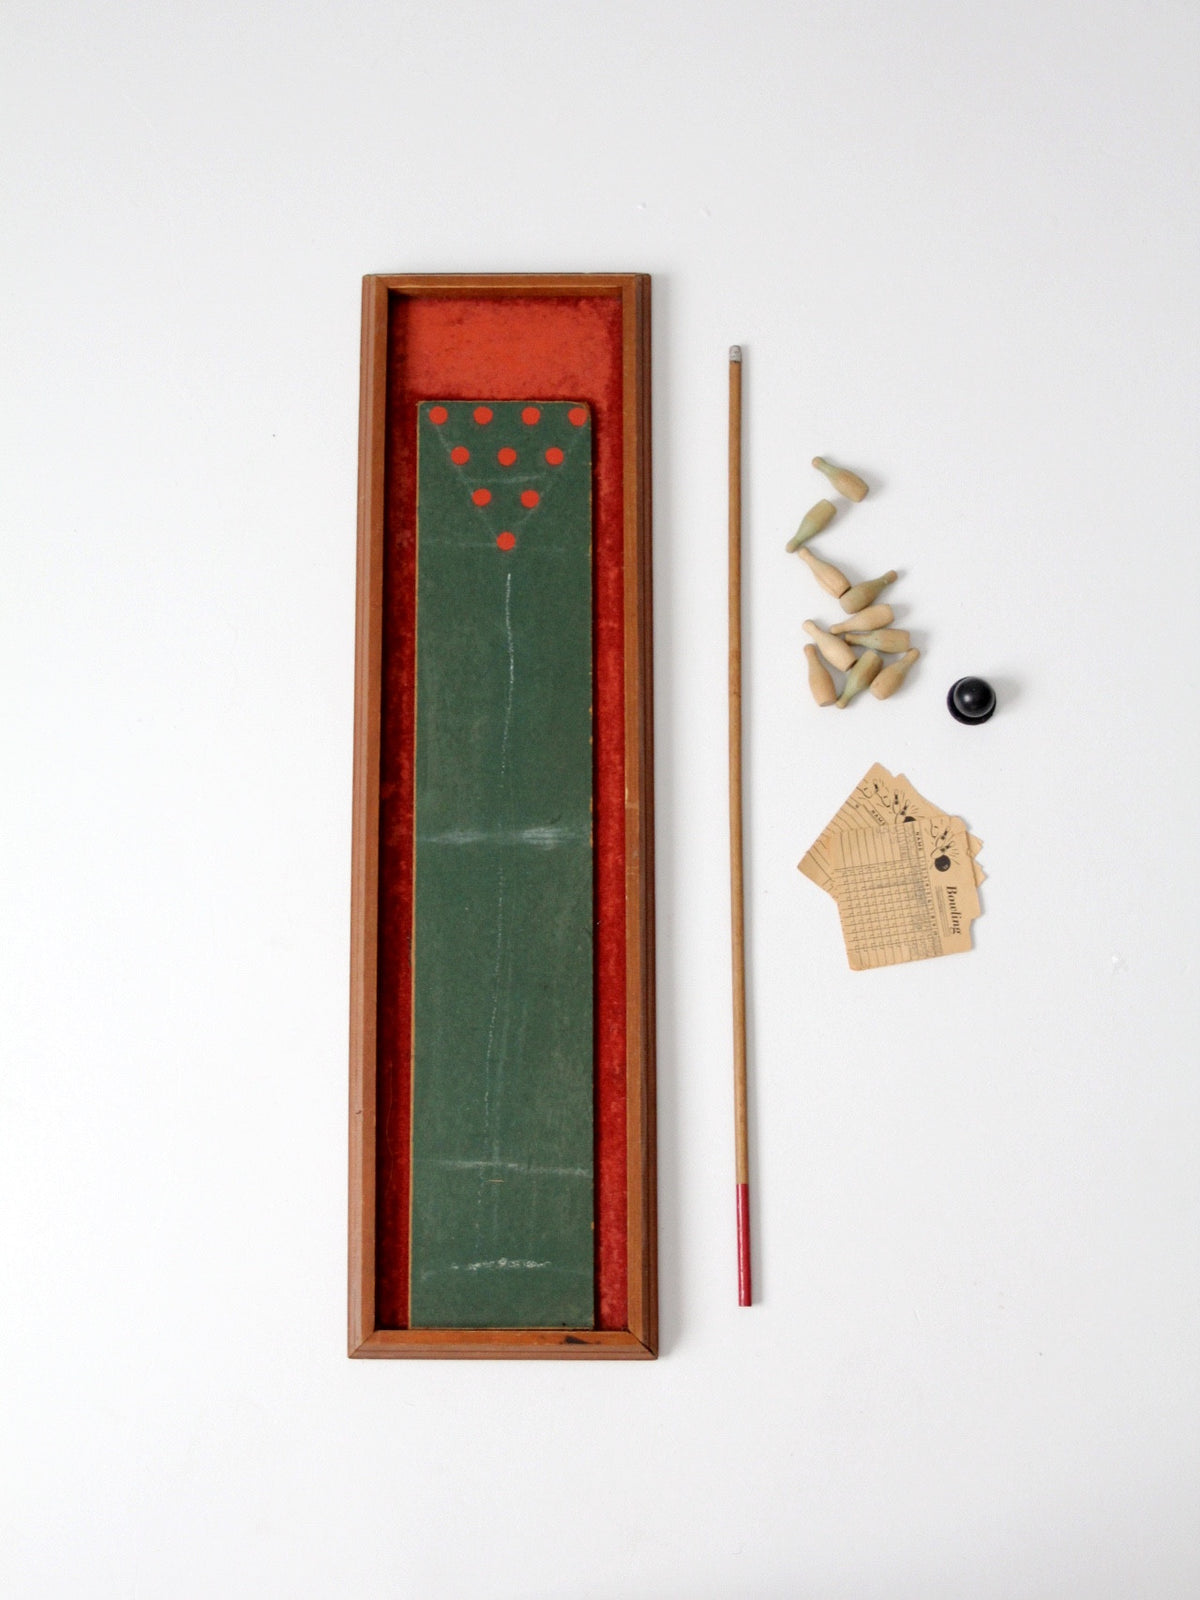 vintage tabletop bowling game with cue stick